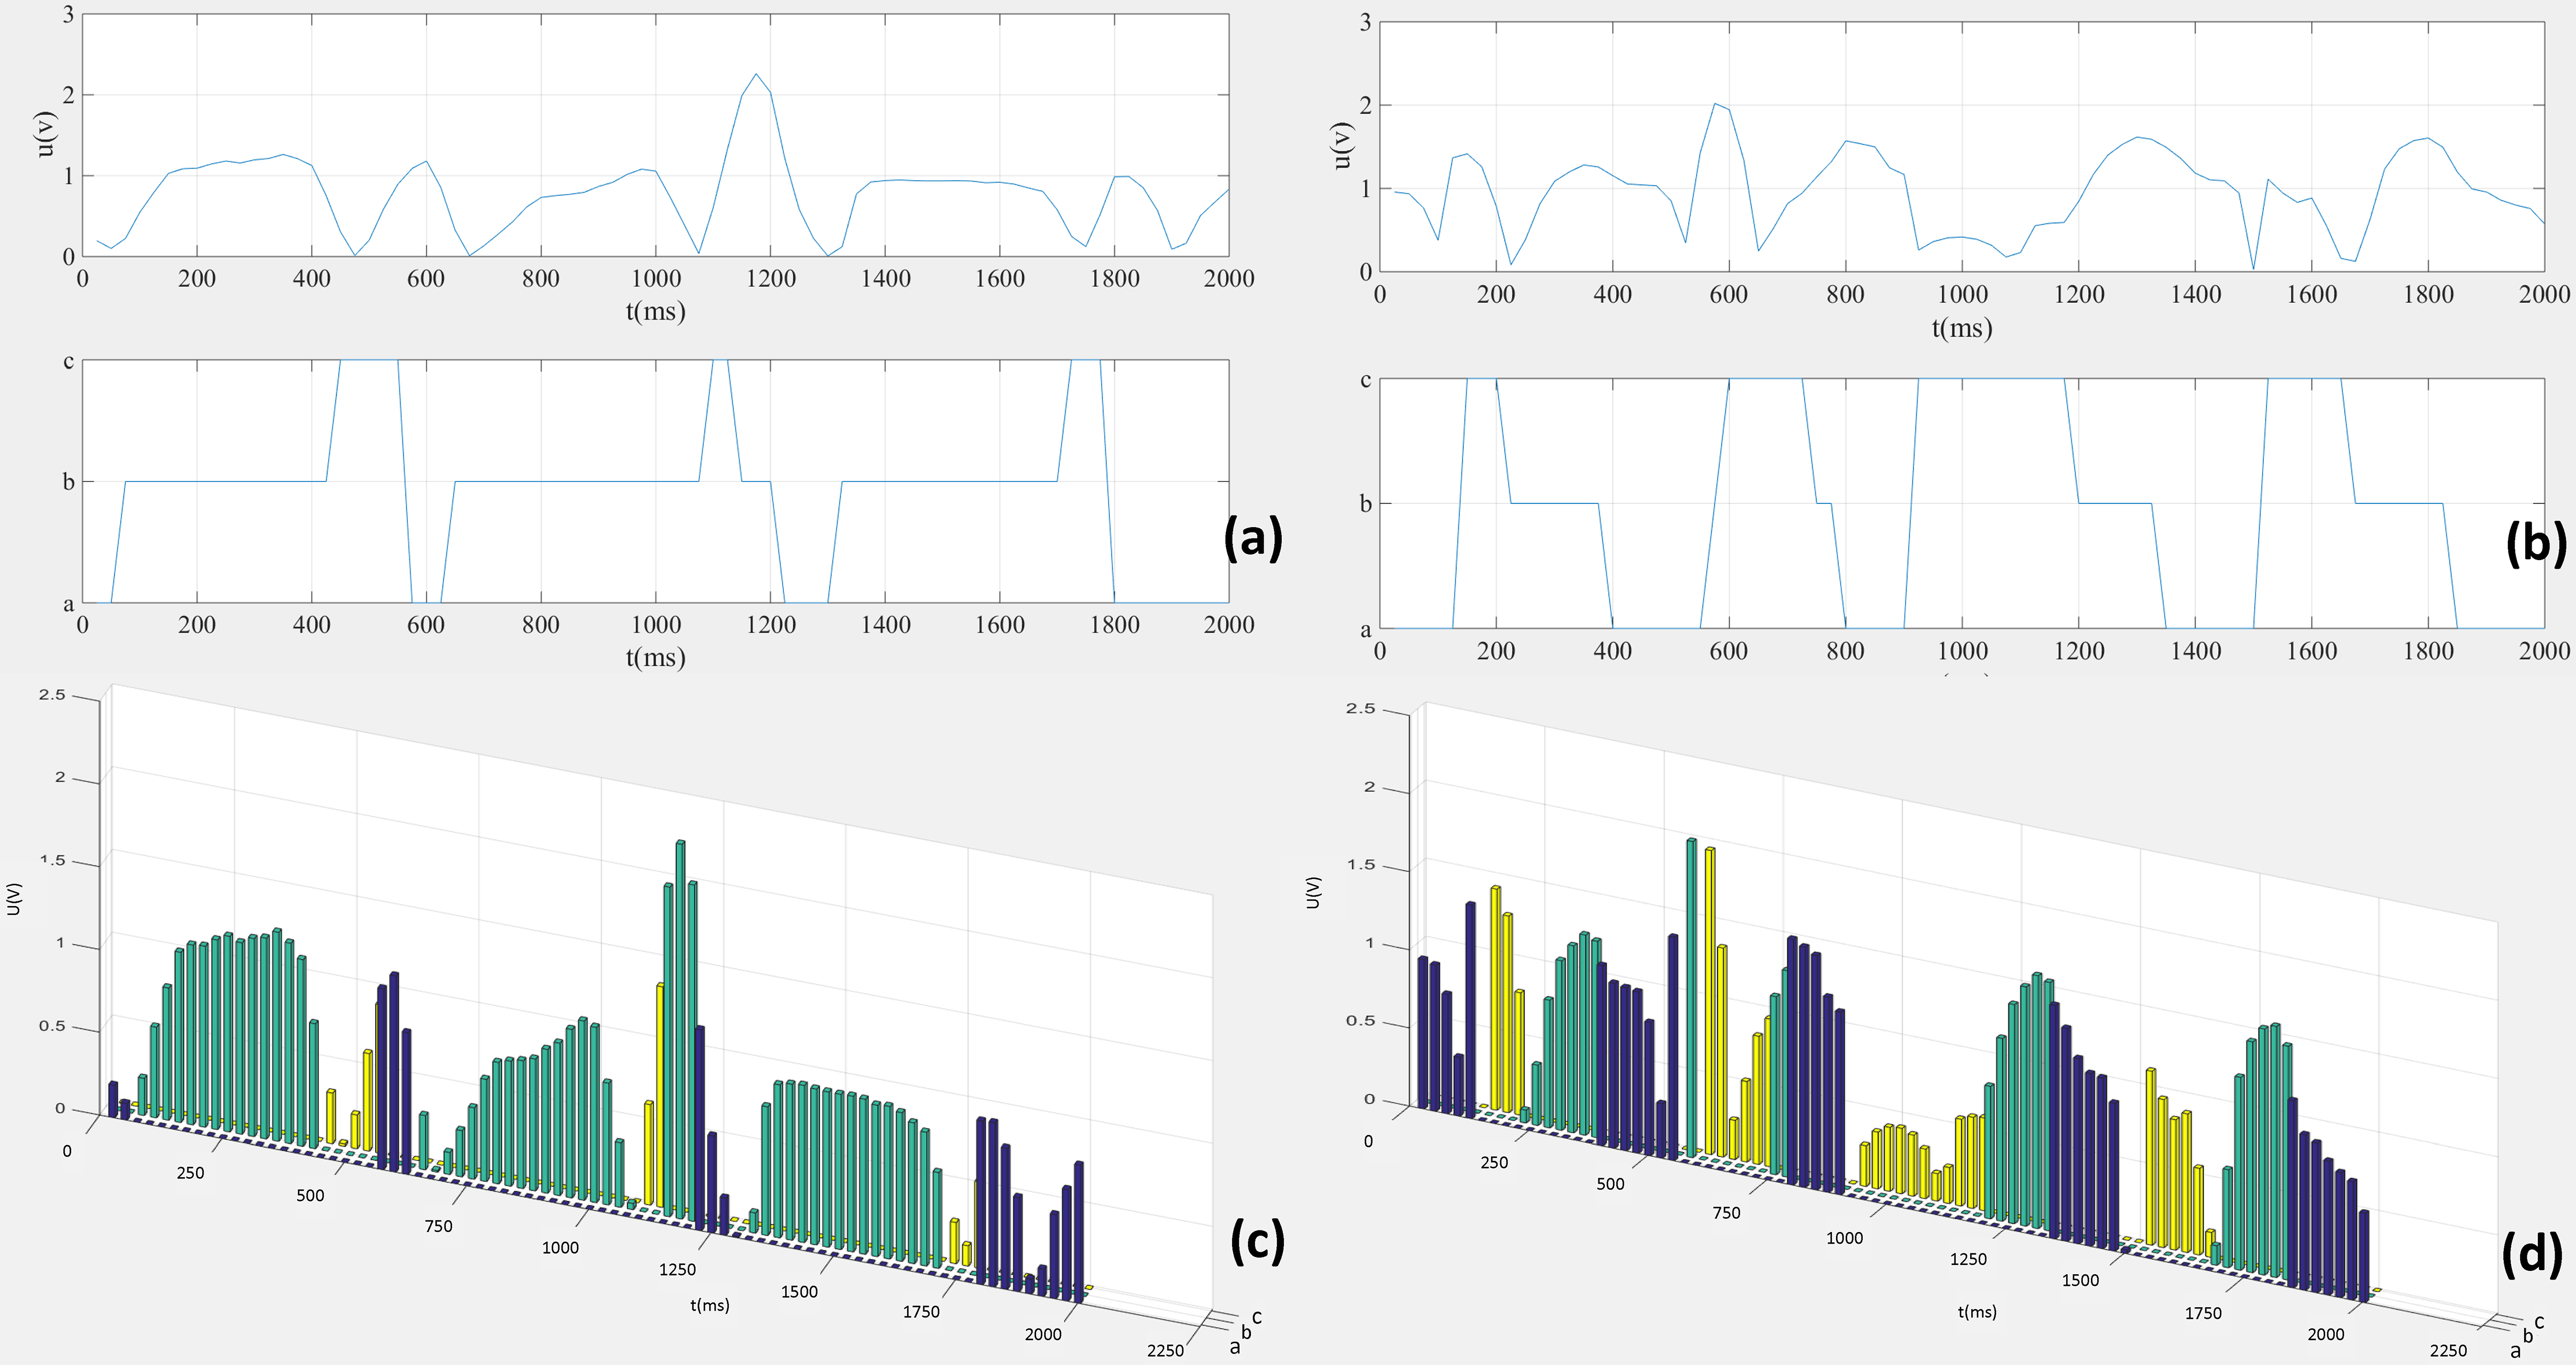 The training data of Tianshu. (a) Training data of Tianshu-left, (b) Training data of Tianshu-right, (c) Histogram of Tianshu-left, (d) Histogram of Tianshu-right. Note: a presents the sensing unit-a, b presents the sensing unit-b, and c presents the sensing unit-c.